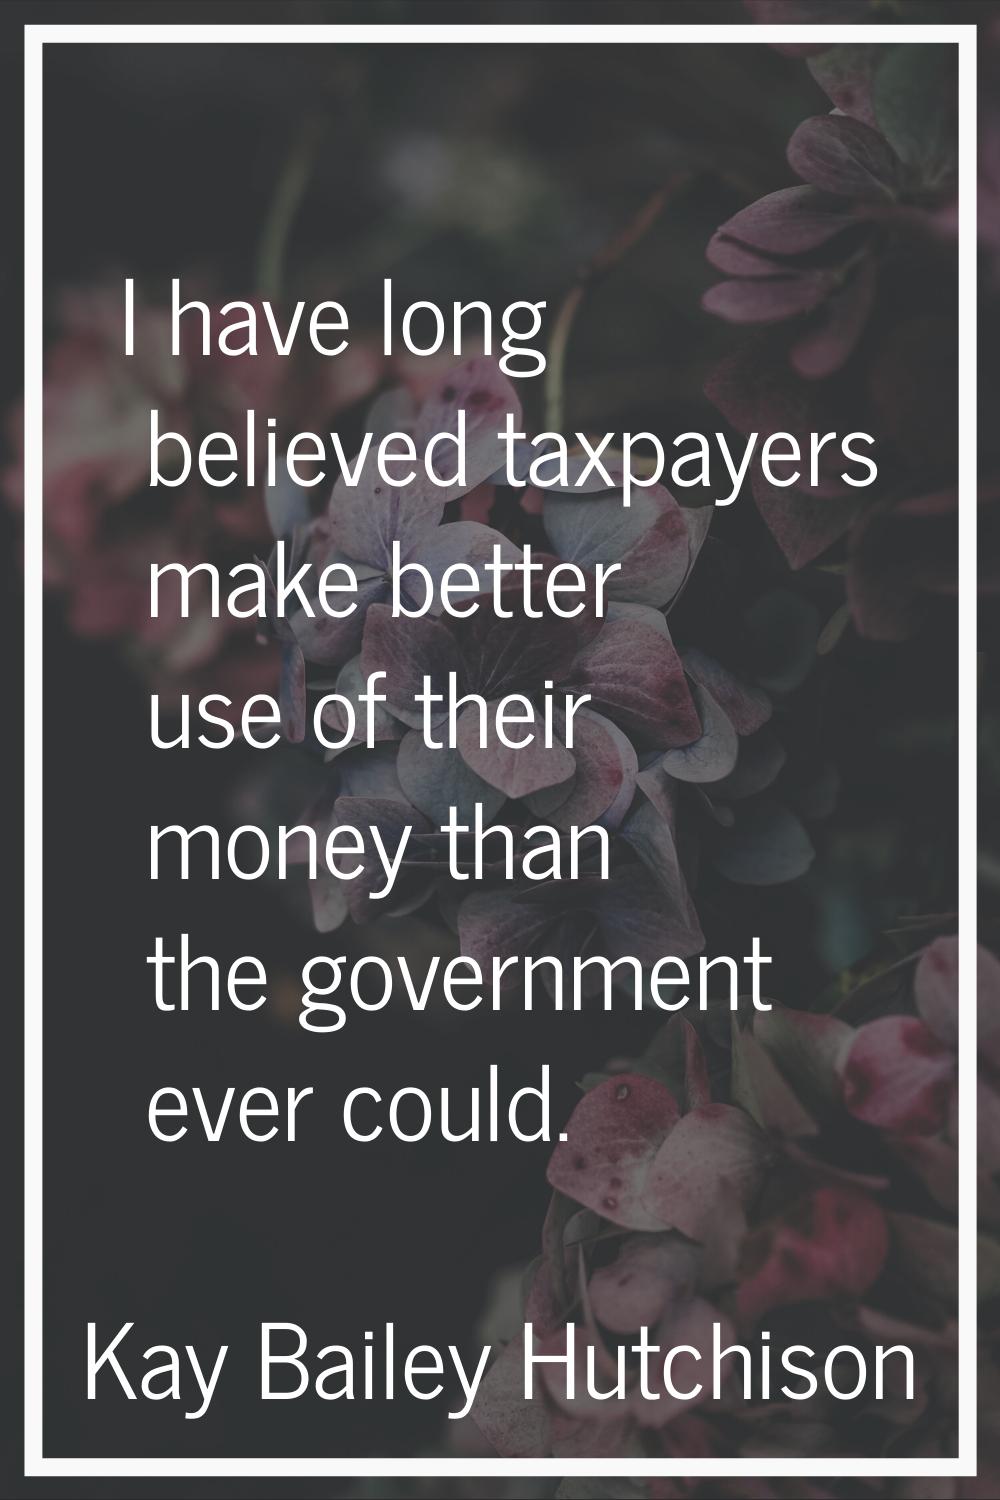 I have long believed taxpayers make better use of their money than the government ever could.